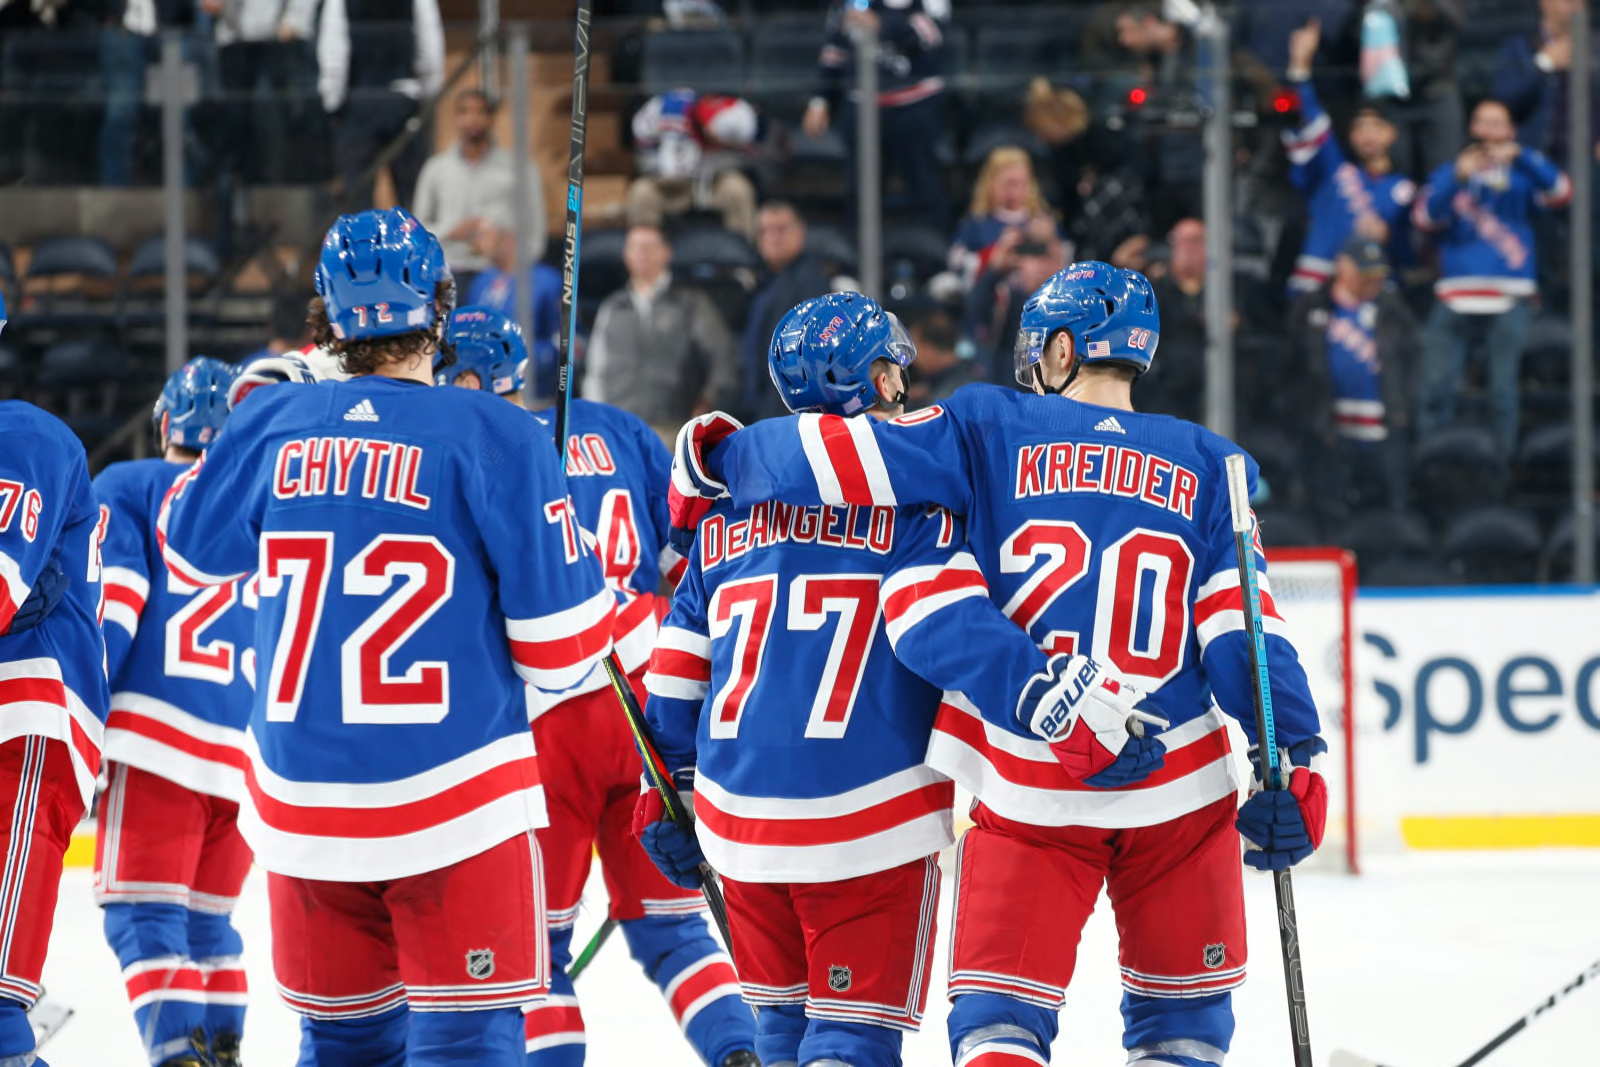 New York Rangers vs Detroit Red Wings Join the live conversation!